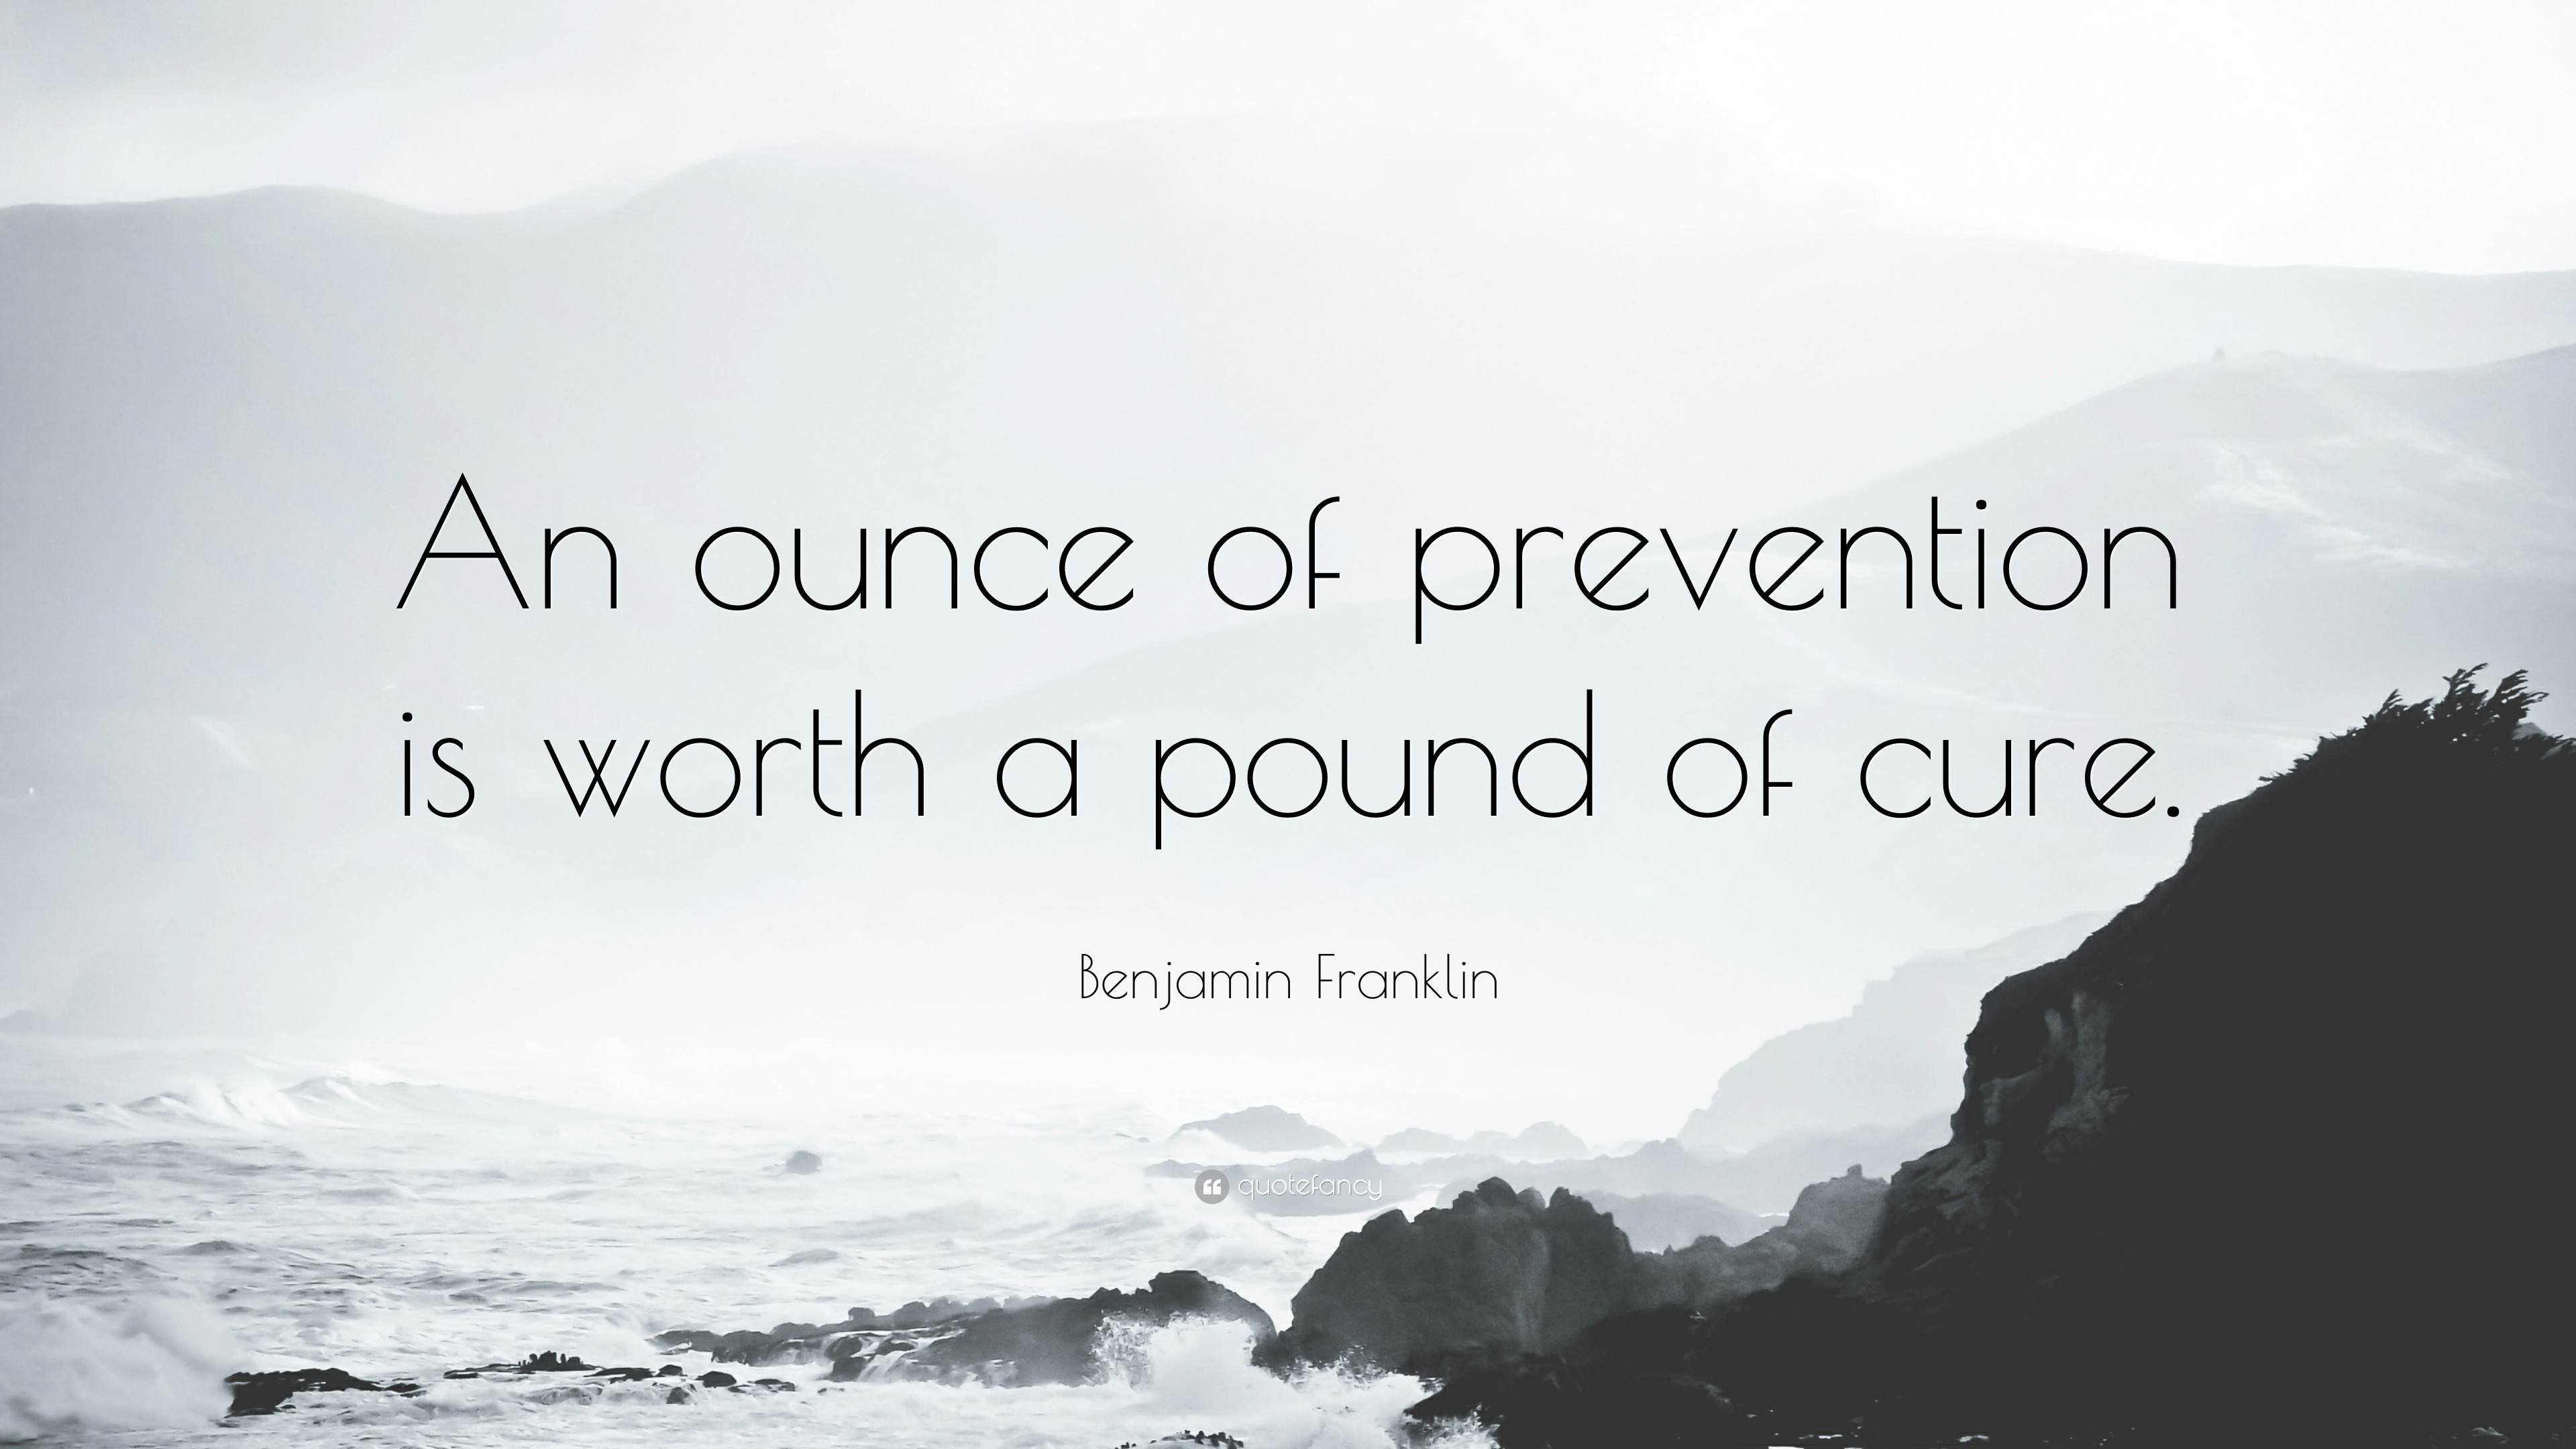 Benjamin Franklin Quote: “An ounce of prevention is worth a pound of cure.”